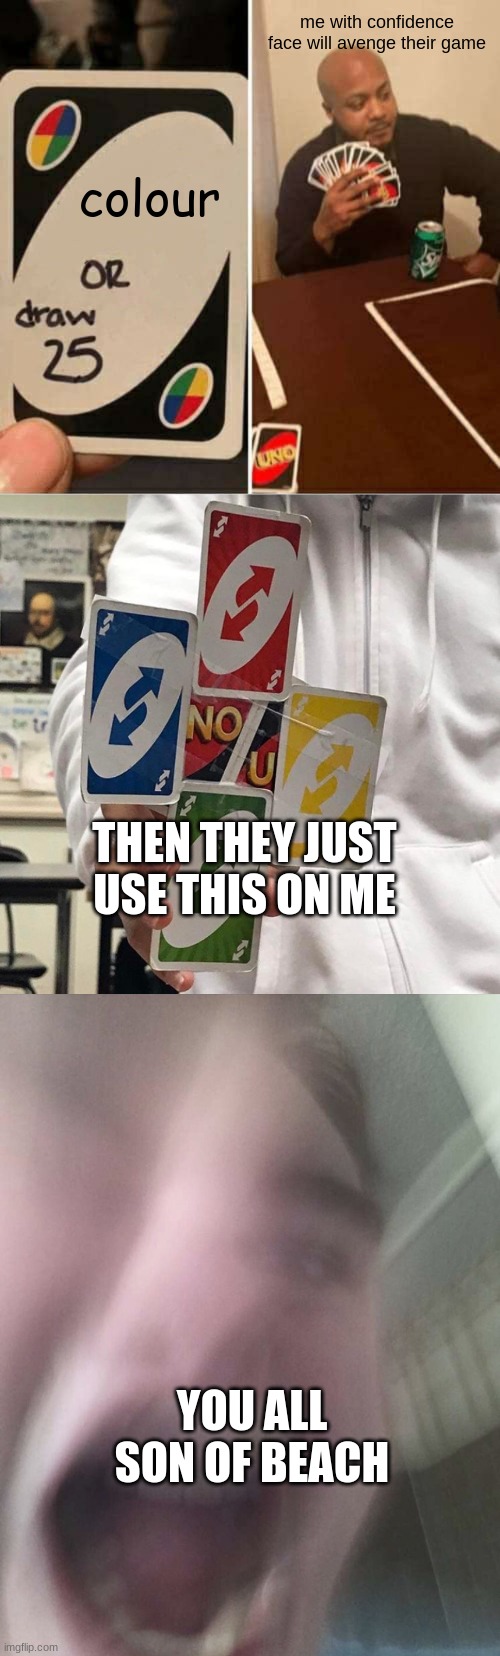 This is not fair | me with confidence face will avenge their game; colour; THEN THEY JUST USE THIS ON ME; YOU ALL SON OF BEACH | image tagged in memes,uno draw 25 cards,no u,screaming face | made w/ Imgflip meme maker